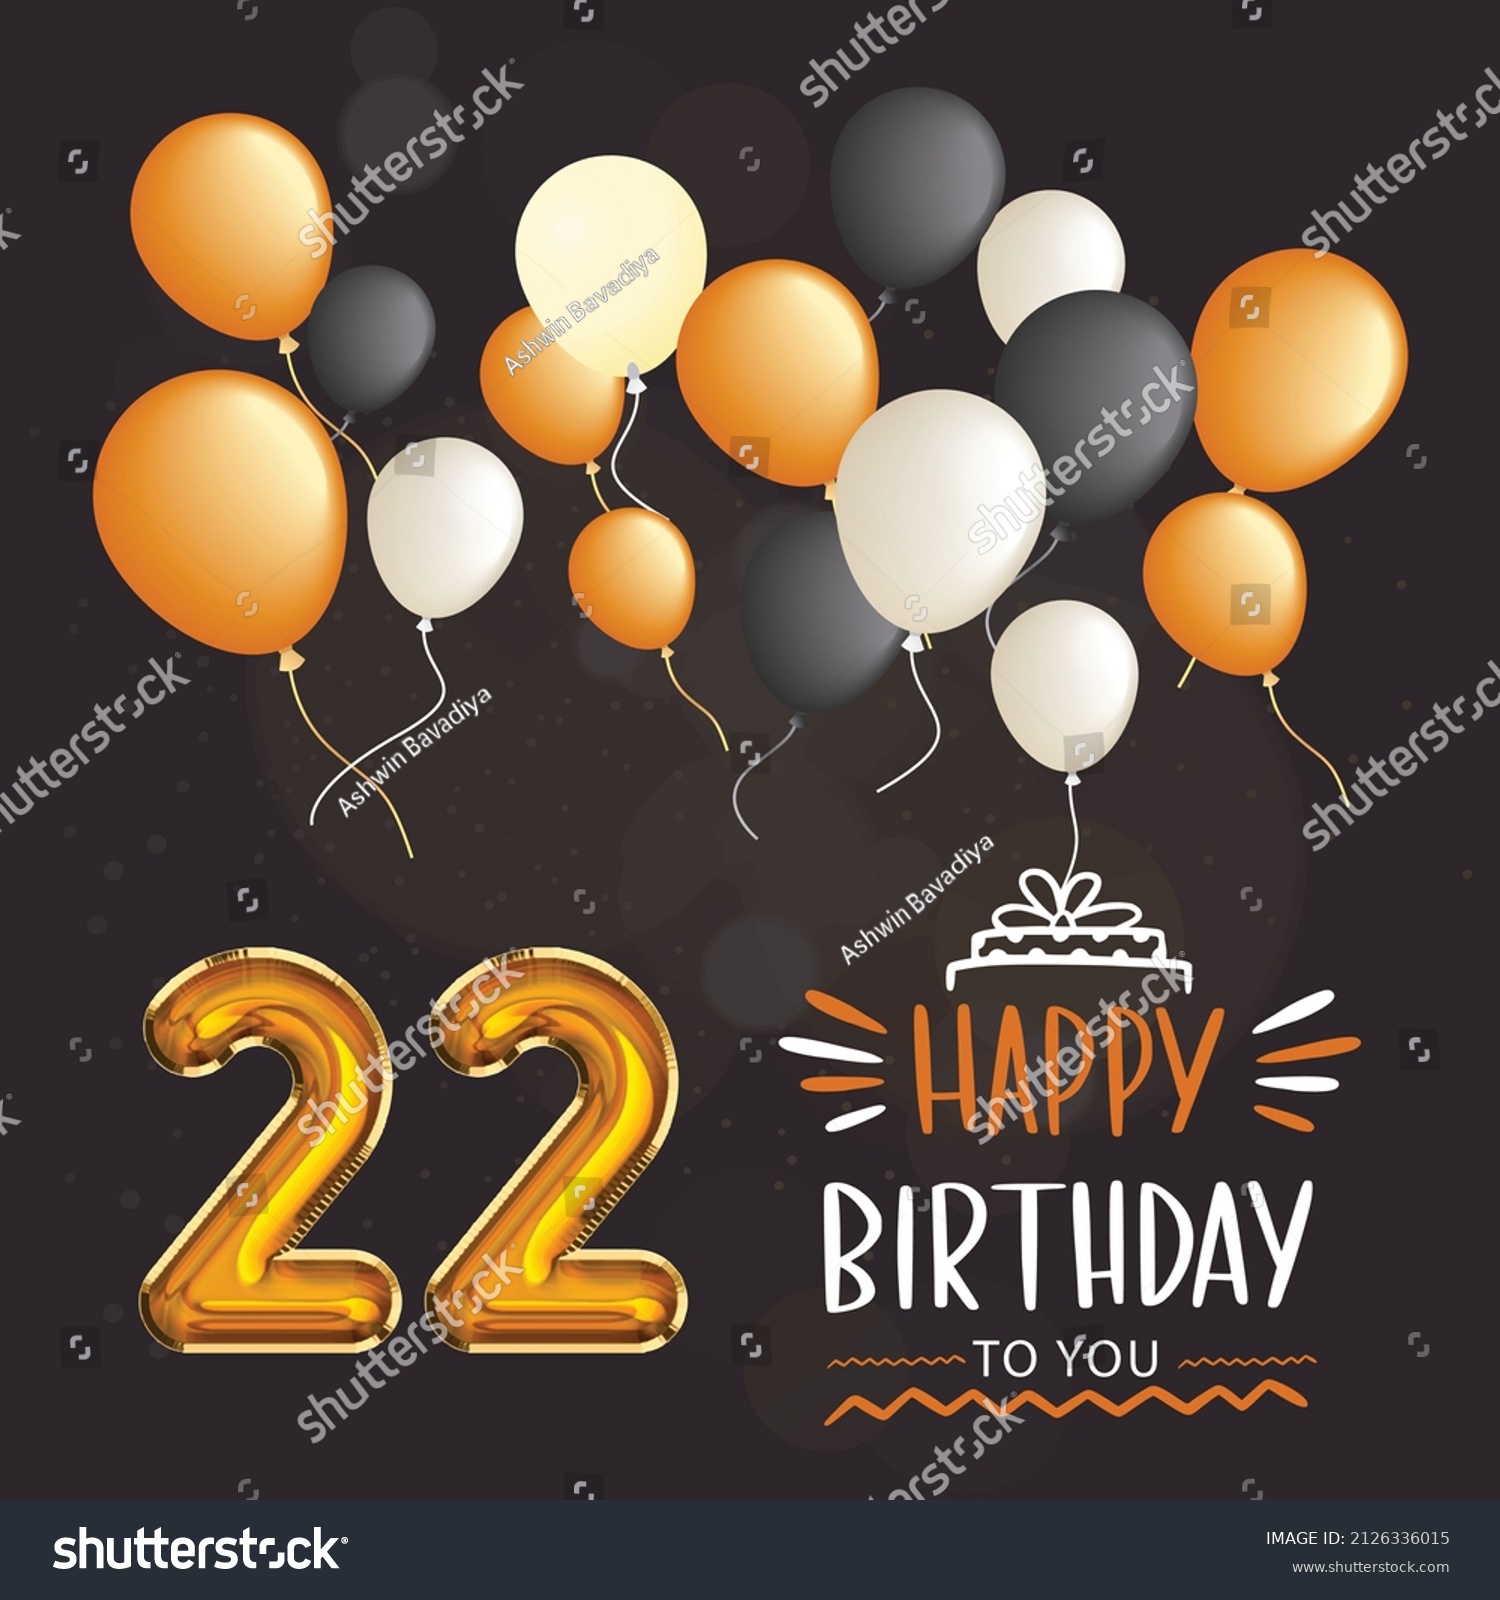 Happy 22nd birthday, greeting card, vector - Royalty Free Stock Vector ...